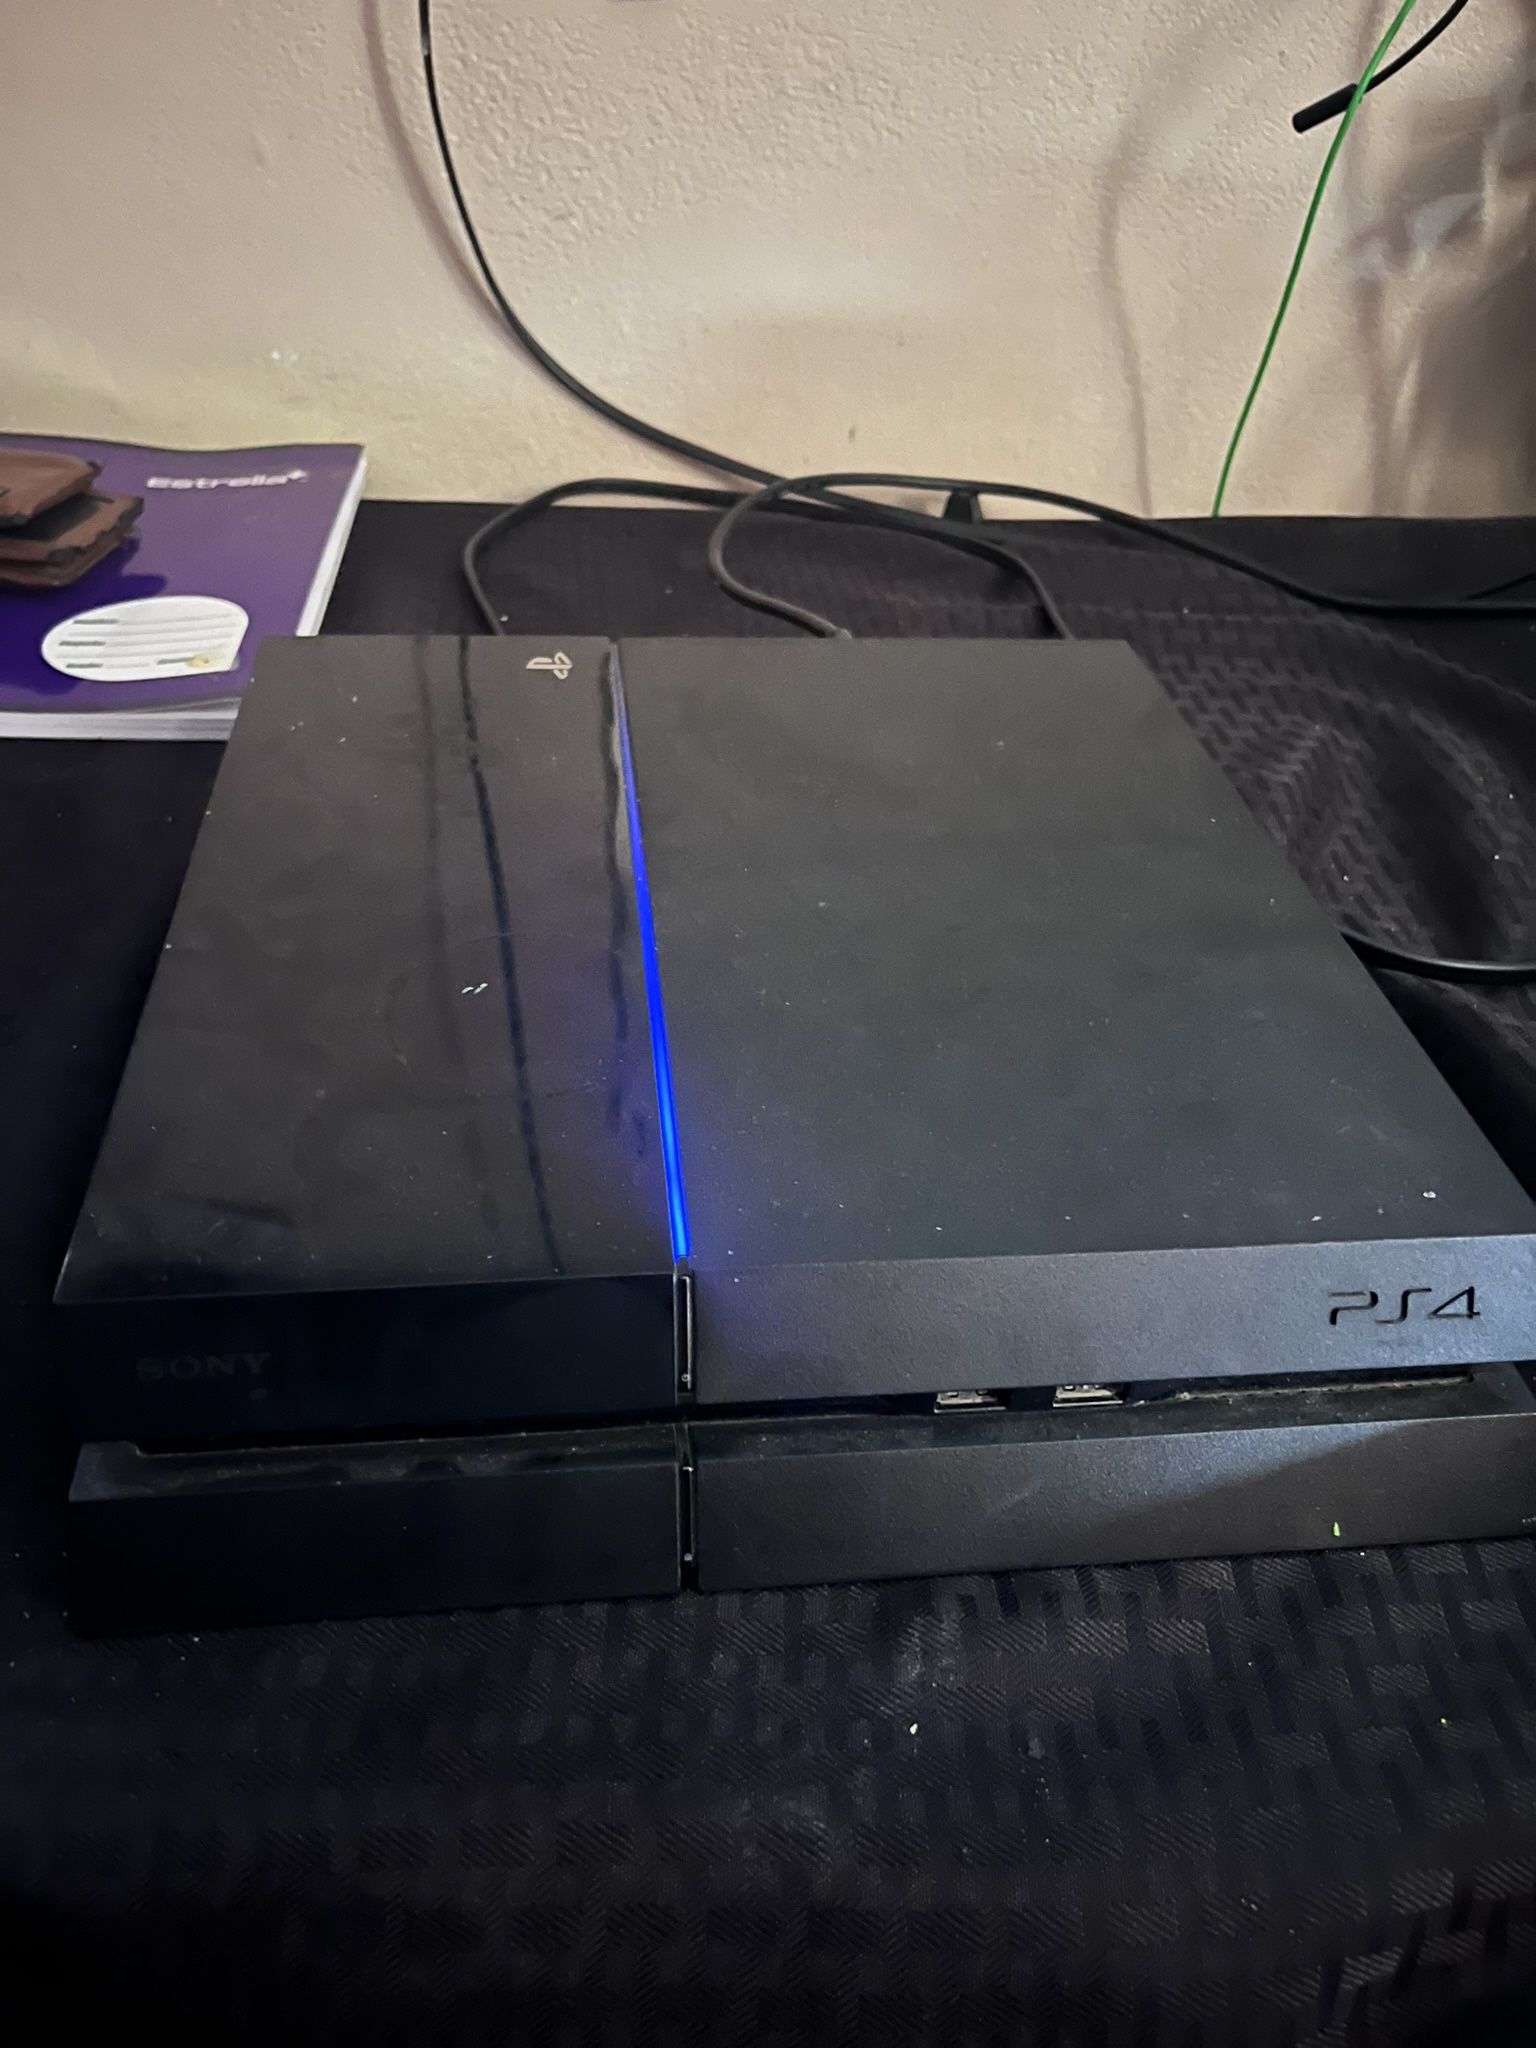 PS4 FOR SALE 